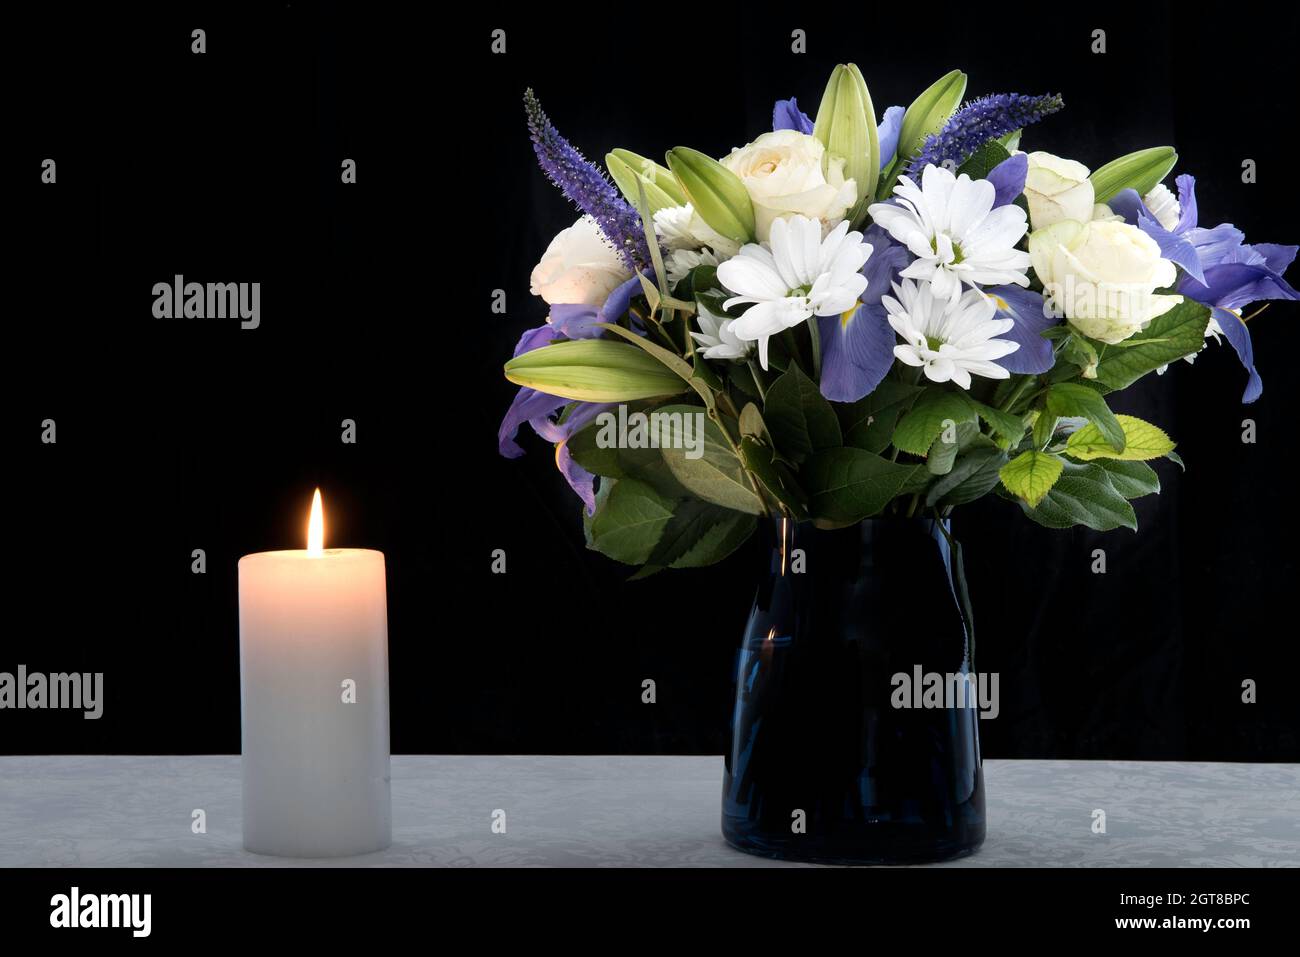 Funeral Bouquet purple White flowers and burning white candle